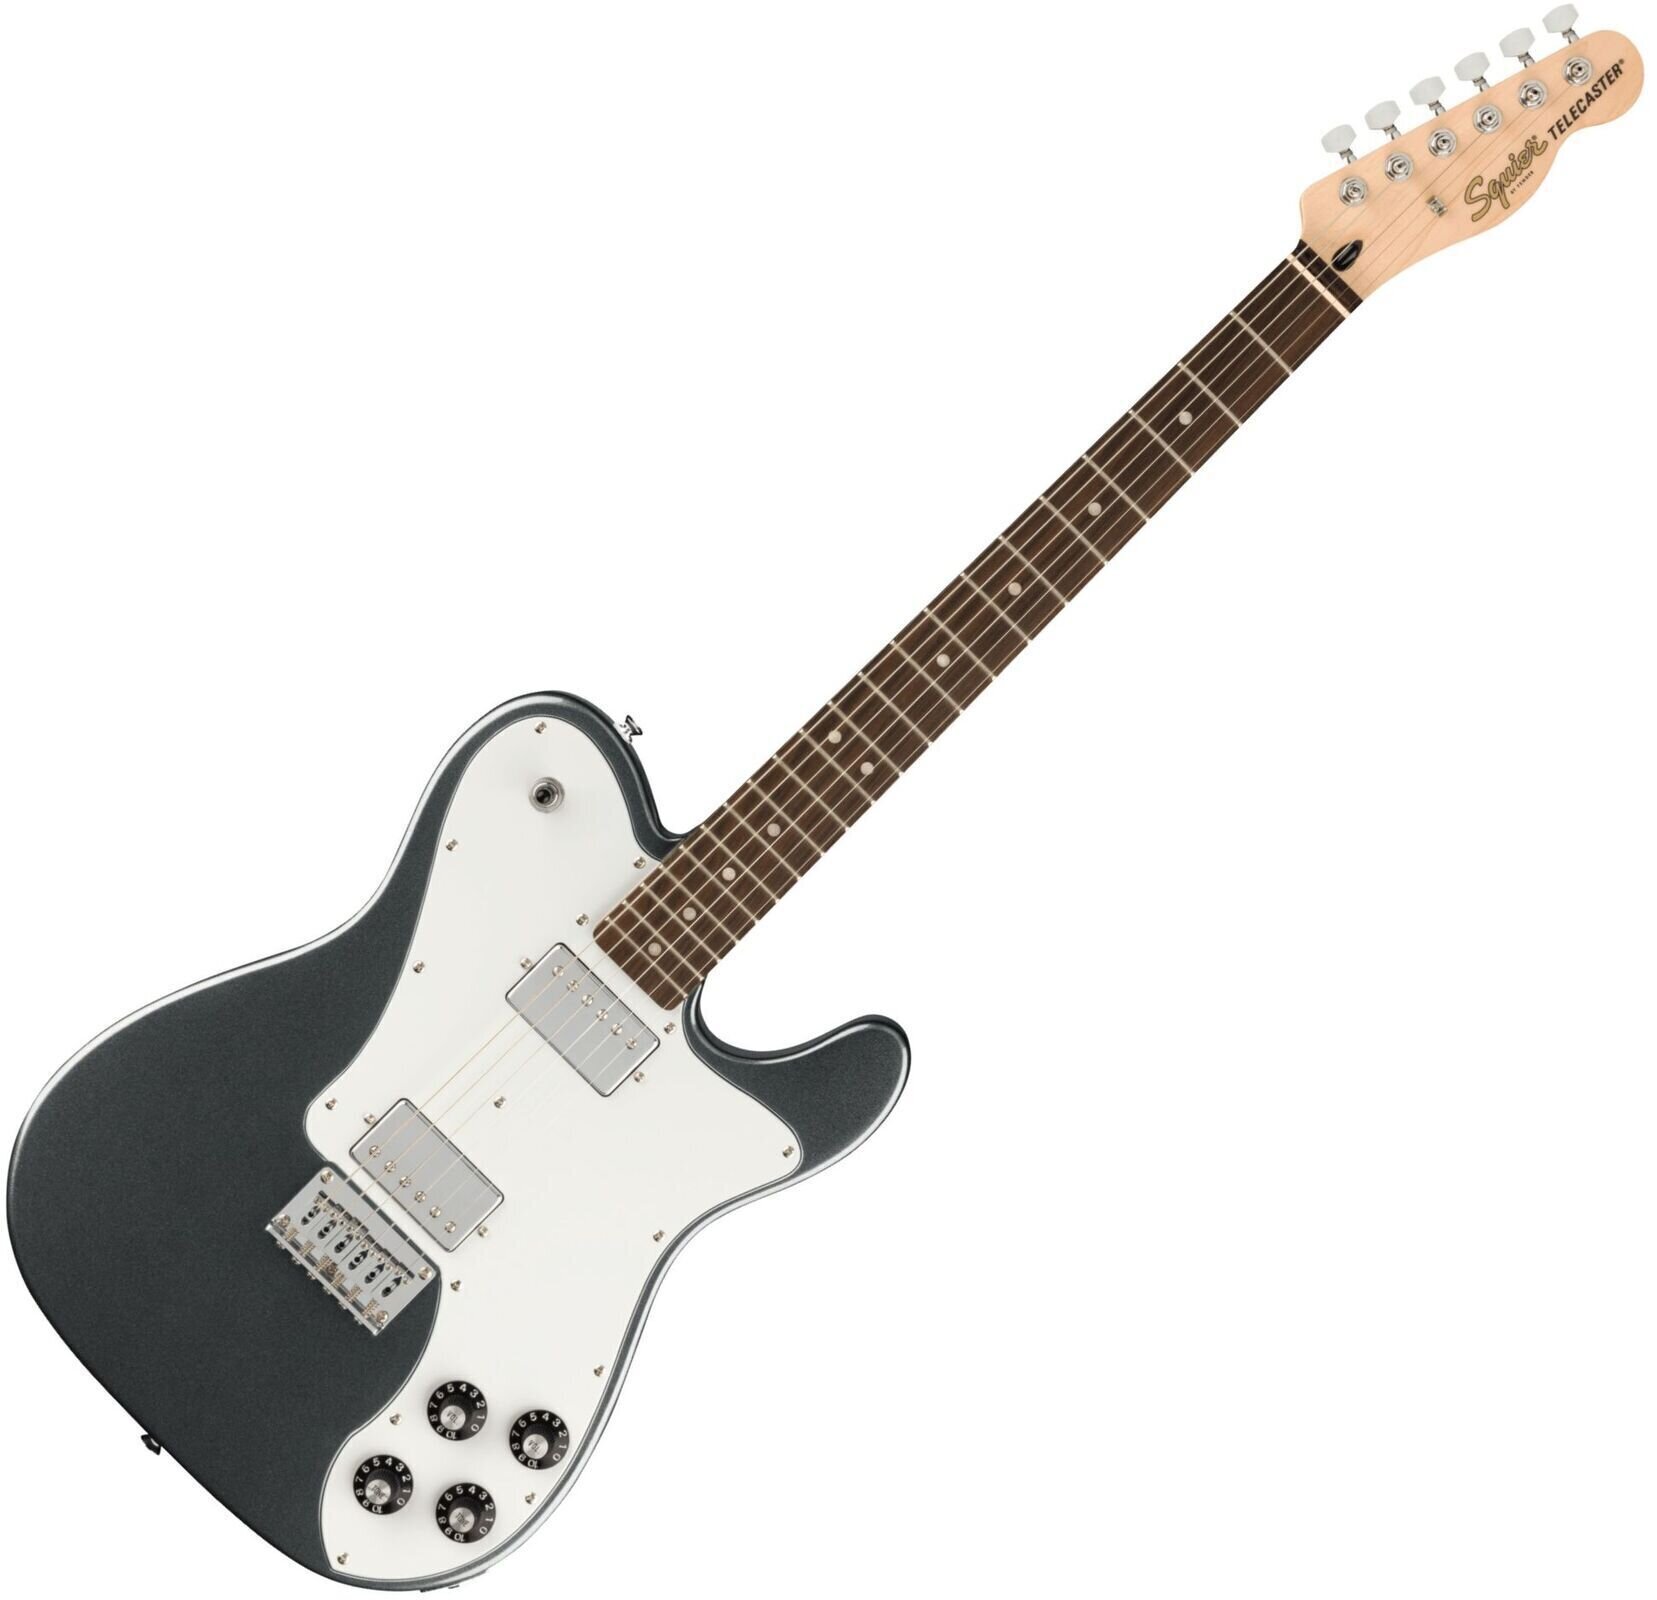 Electric guitar Fender Squier Affinity Series Telecaster Deluxe Charcoal Frost Metallic